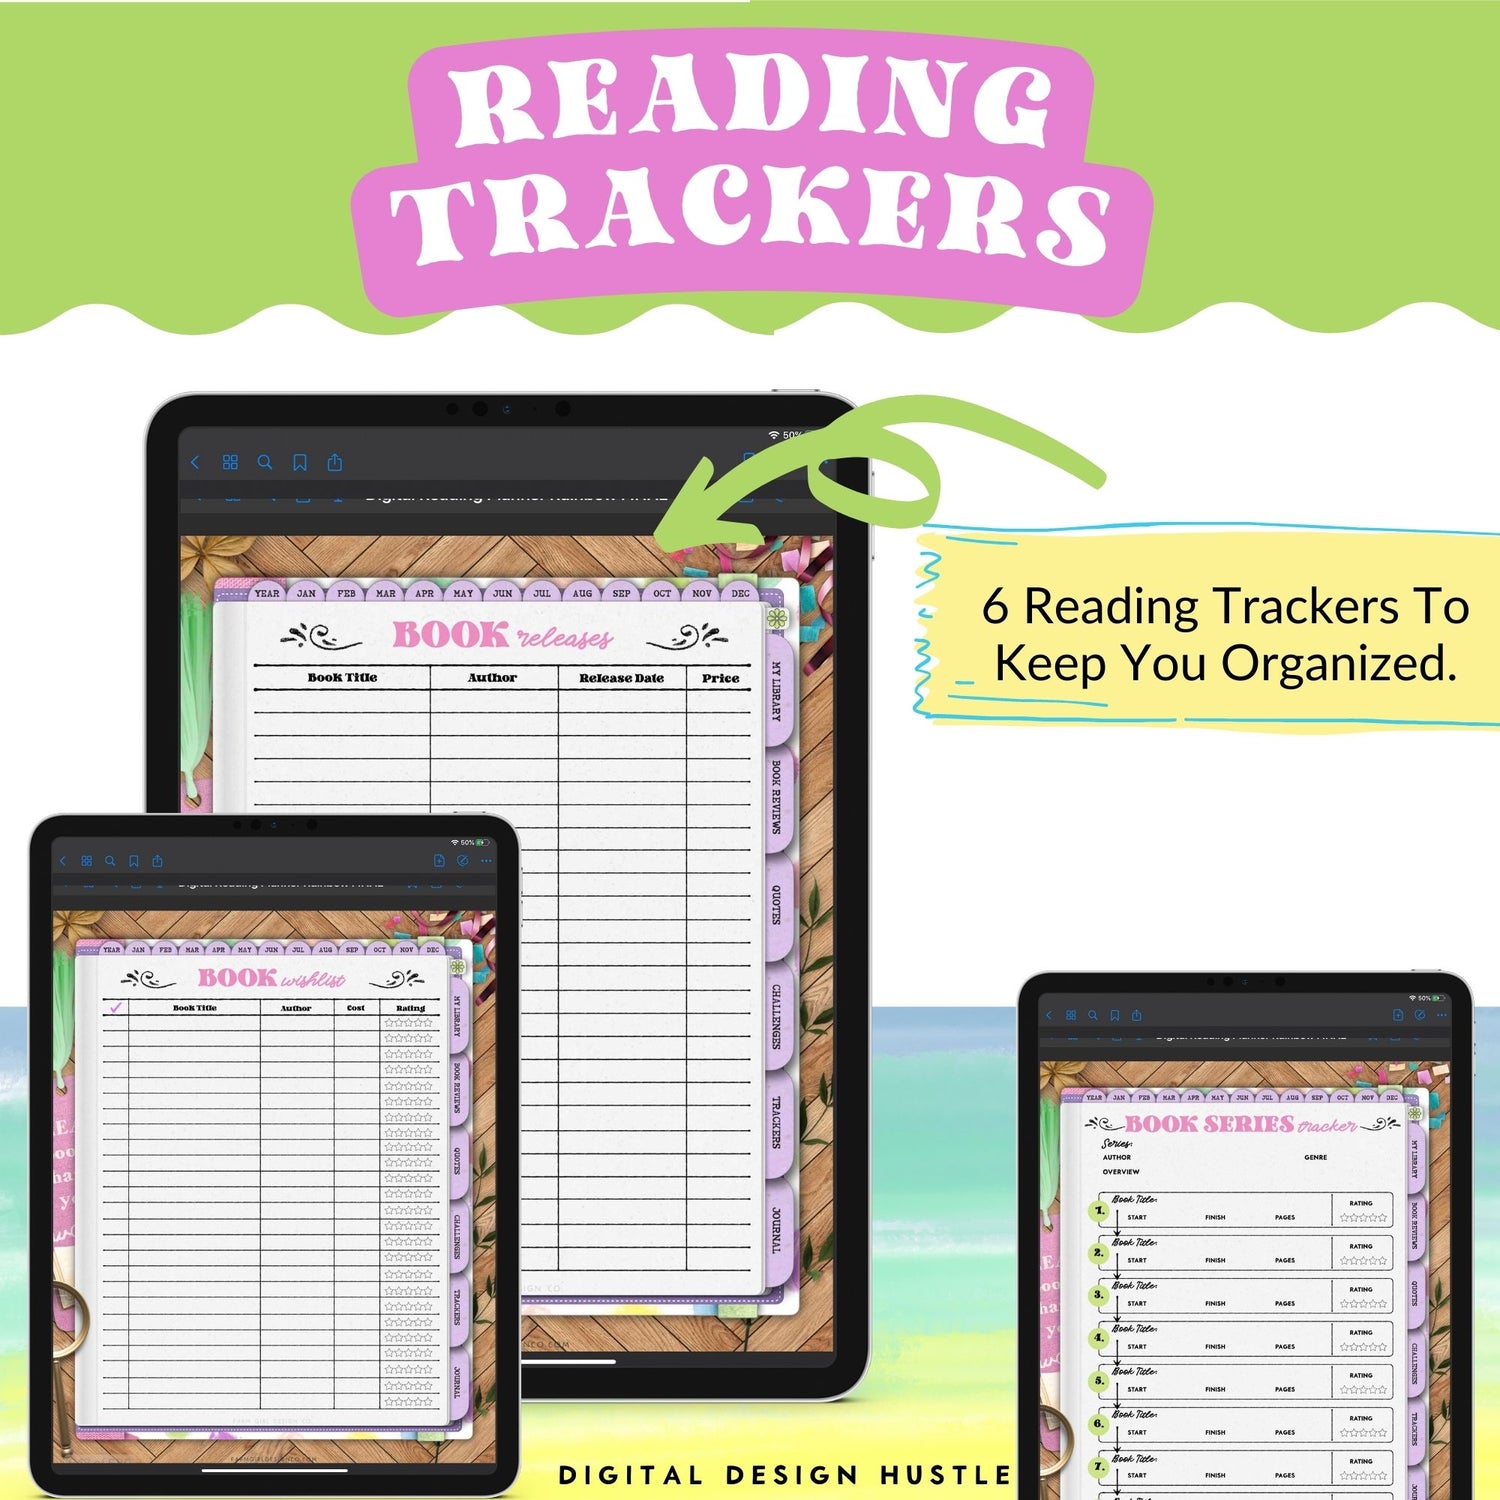 This rainbow digital reading planner is a fun way to track reading progress, take notes in the digital notebook and write thoughts in the digital journal. This planner includes a monthly and daily planner and reading logs, book trackers, and more. Keep track of all your reading lists, activities, goals too.